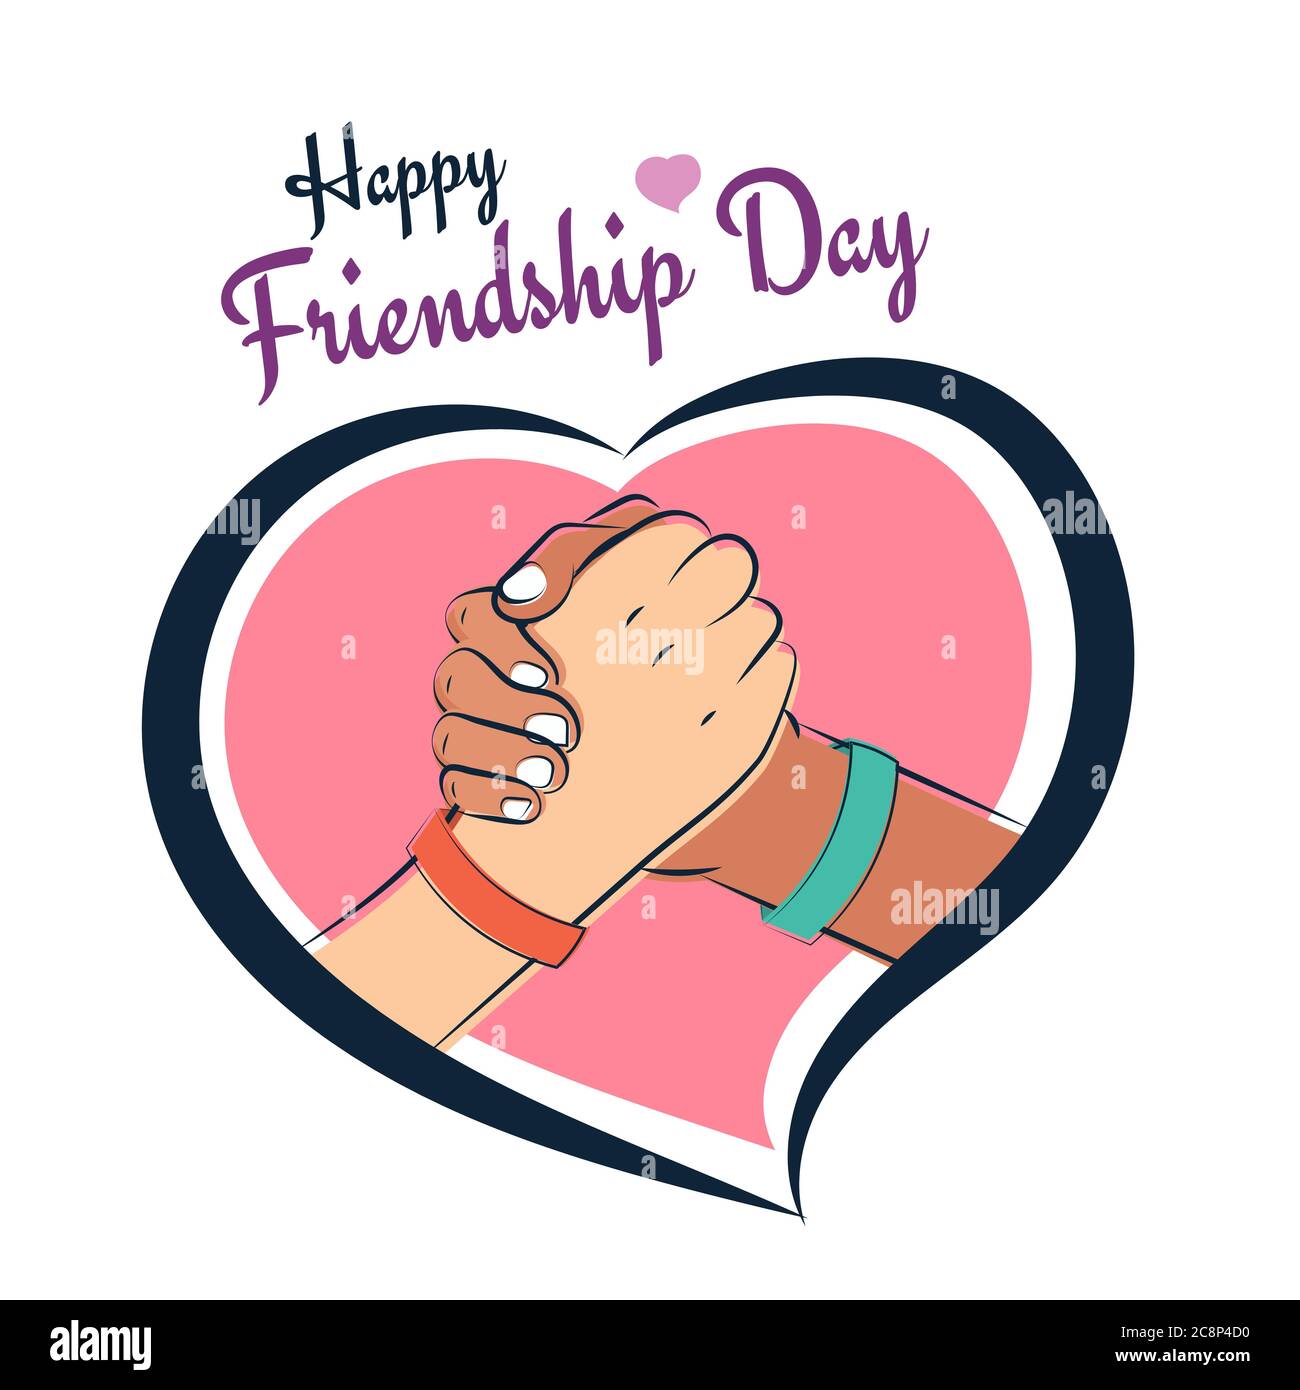 Happy Friendship Day, friends shake hands with love and heart illustration poster, vector Stock Vector